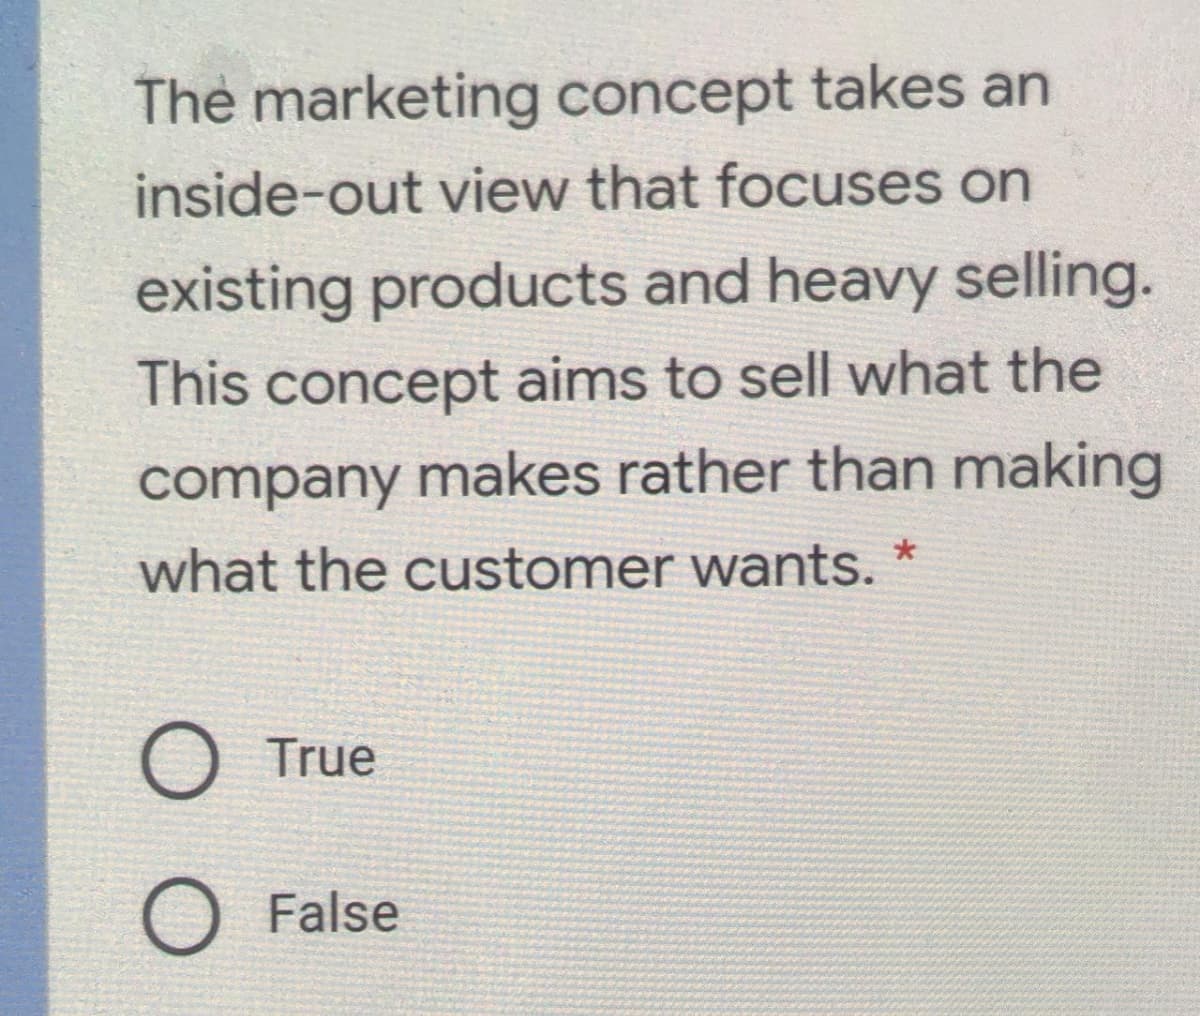 The marketing concept takes an
inside-out view that focuses on
existing products and heavy selling.
This concept aims to sell what the
company makes rather than making
what the customer wants. *
O True
O False
